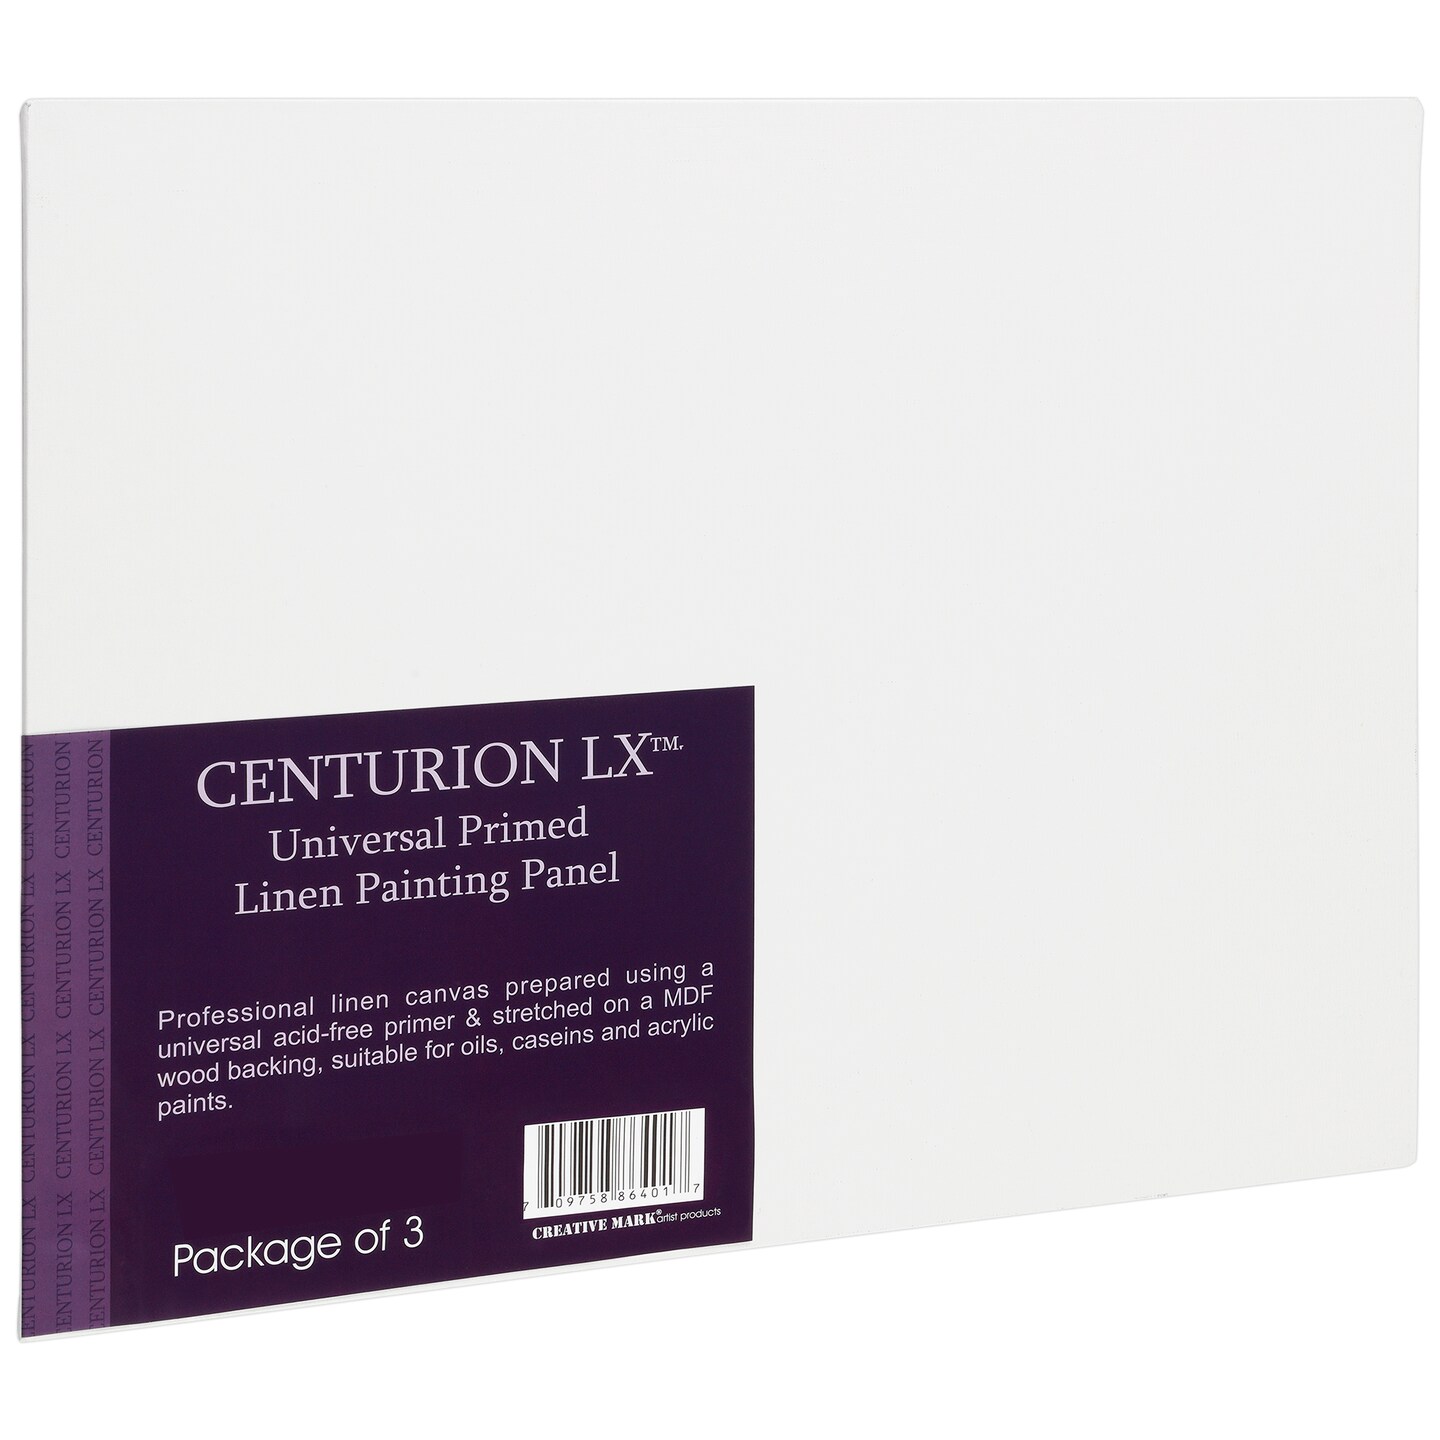 Centurion Universal Acrylic Primed Linen Panels -Canvases for Painting - 3 pack of Canvases for Oils, Acrylics, Water-Mixable Oils, and More